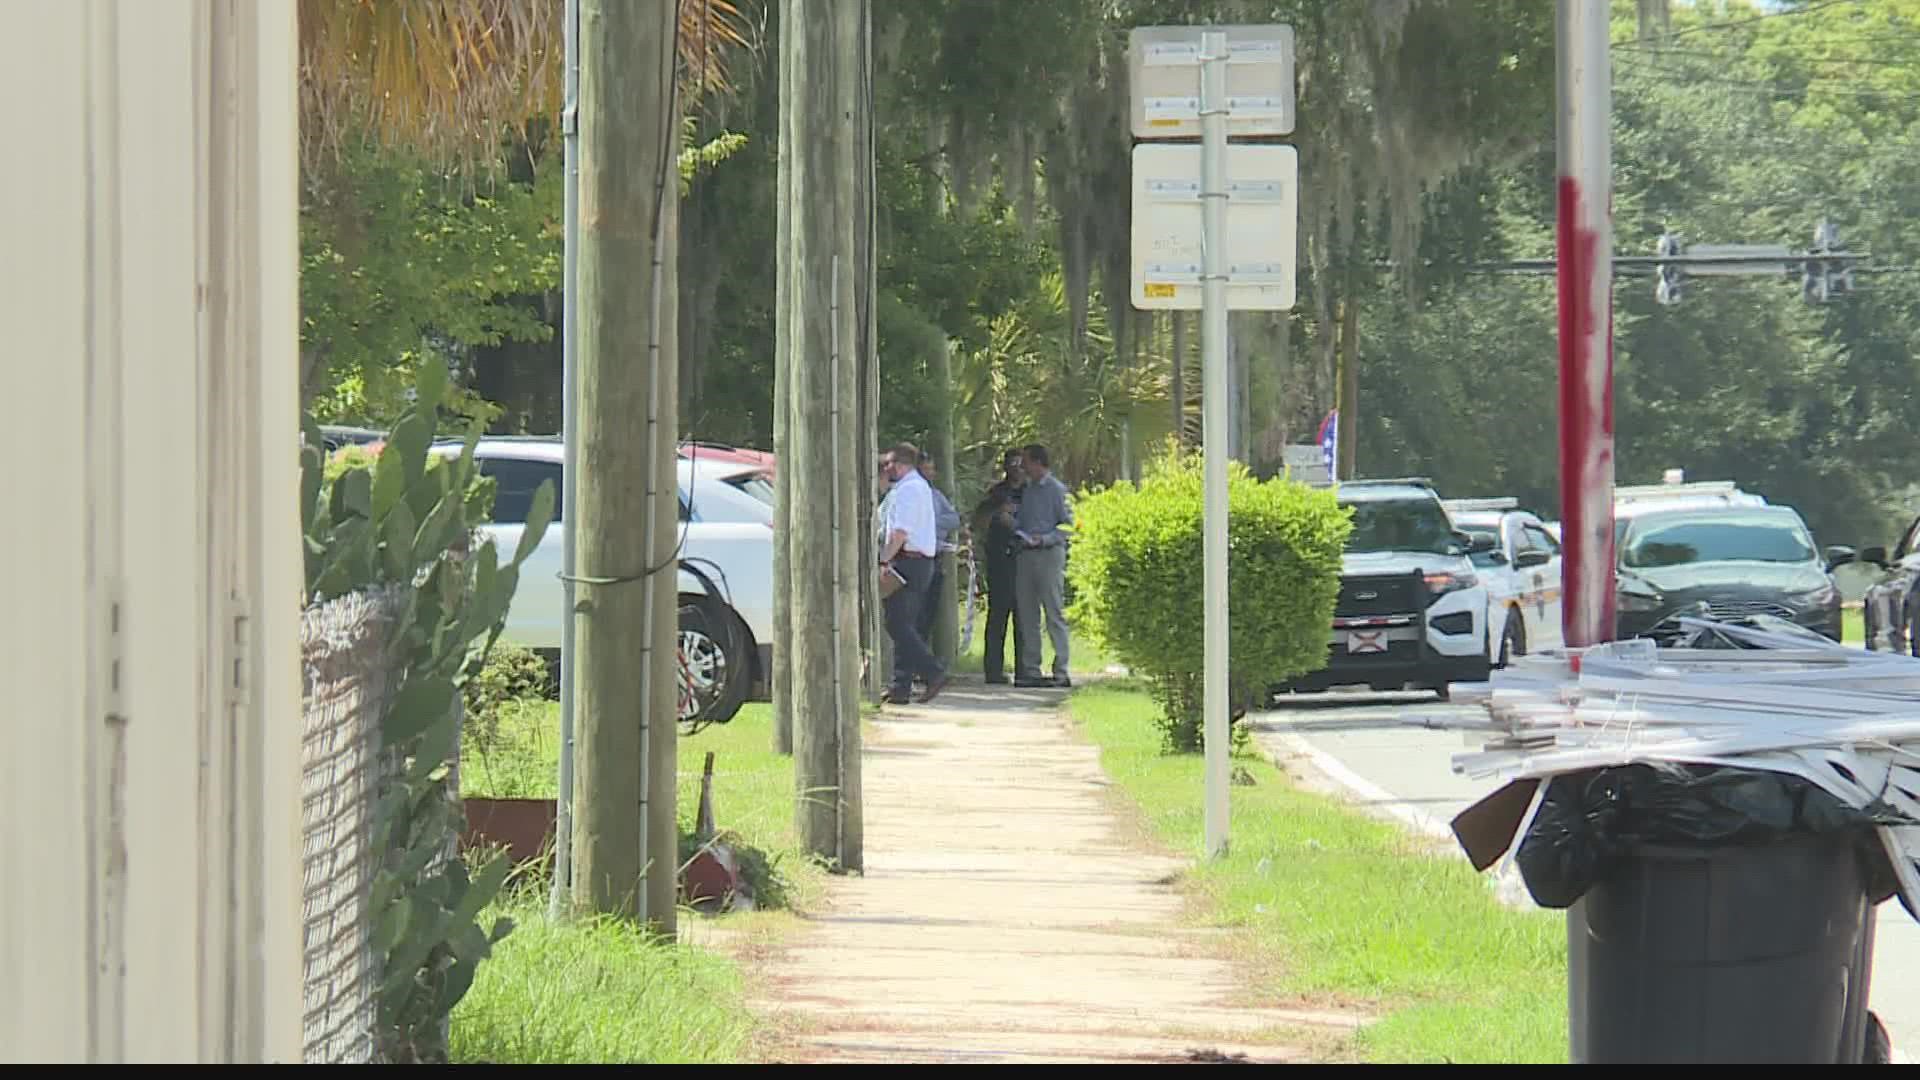 JSO responded to multiple shots fired around 10 a.m. Monday in the 100 block of West 27th Street, an unidentified woman later died in the ER.